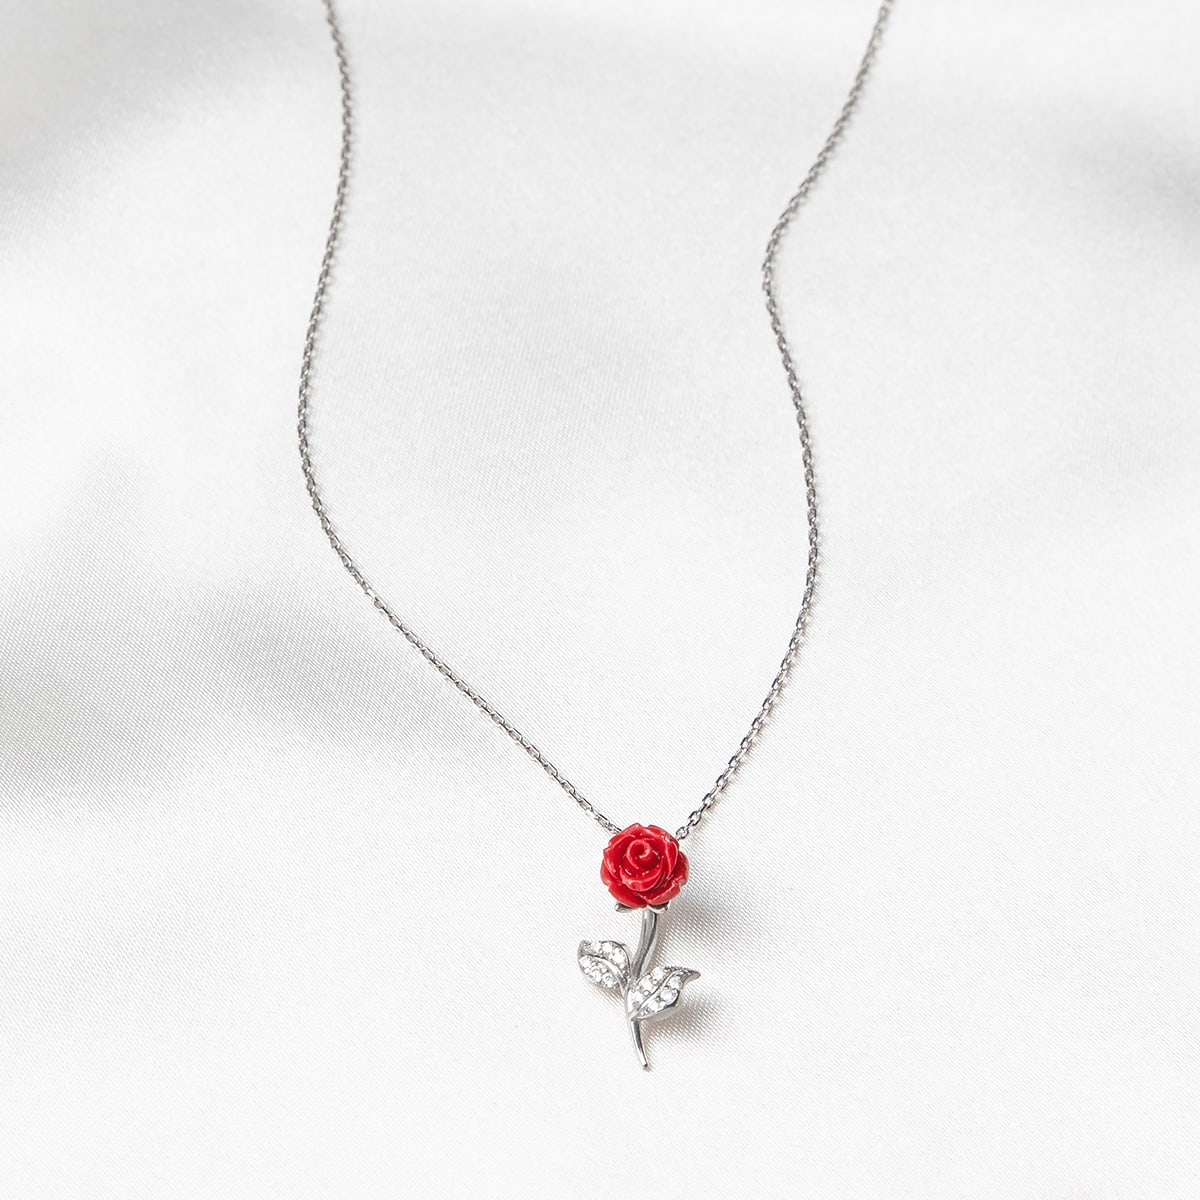 To My Granddaughter the Beauty - Red Rose Necklace Gift Set